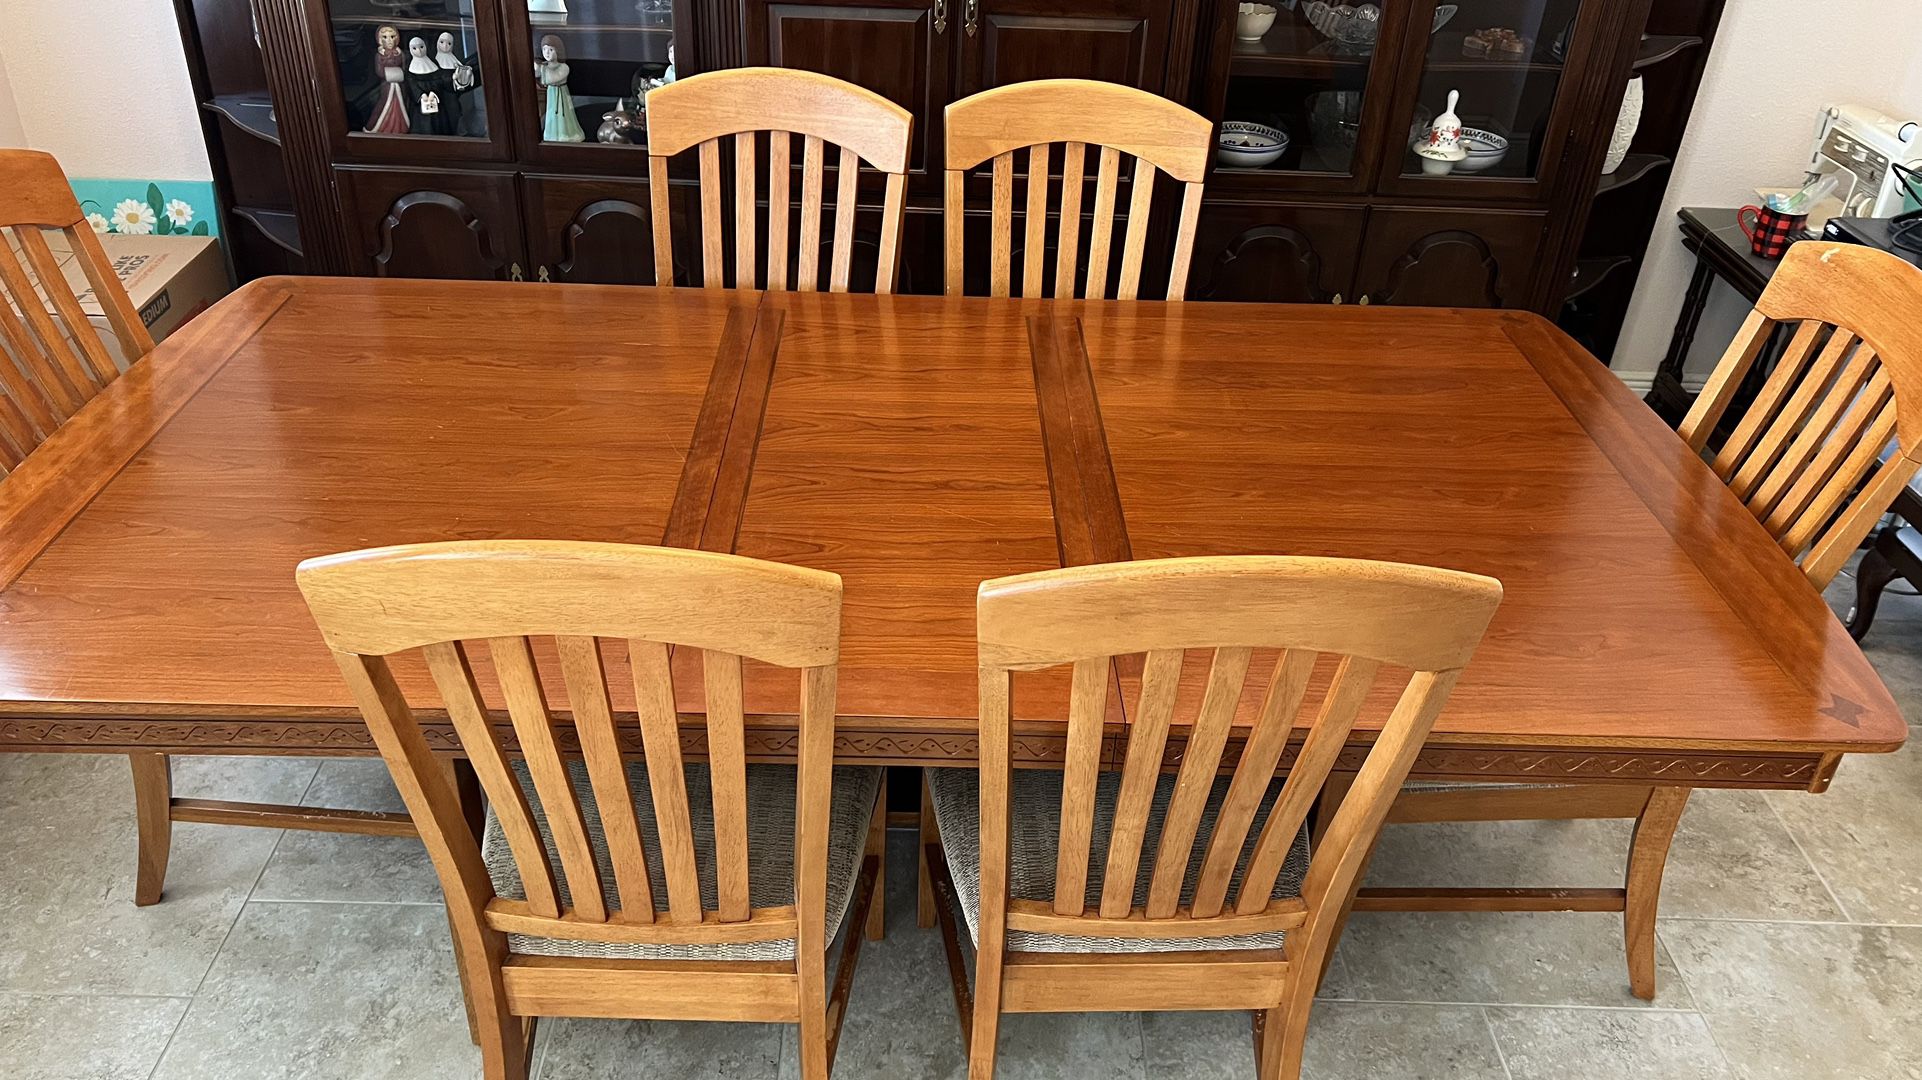 Dining Room Table - 6 Chairs